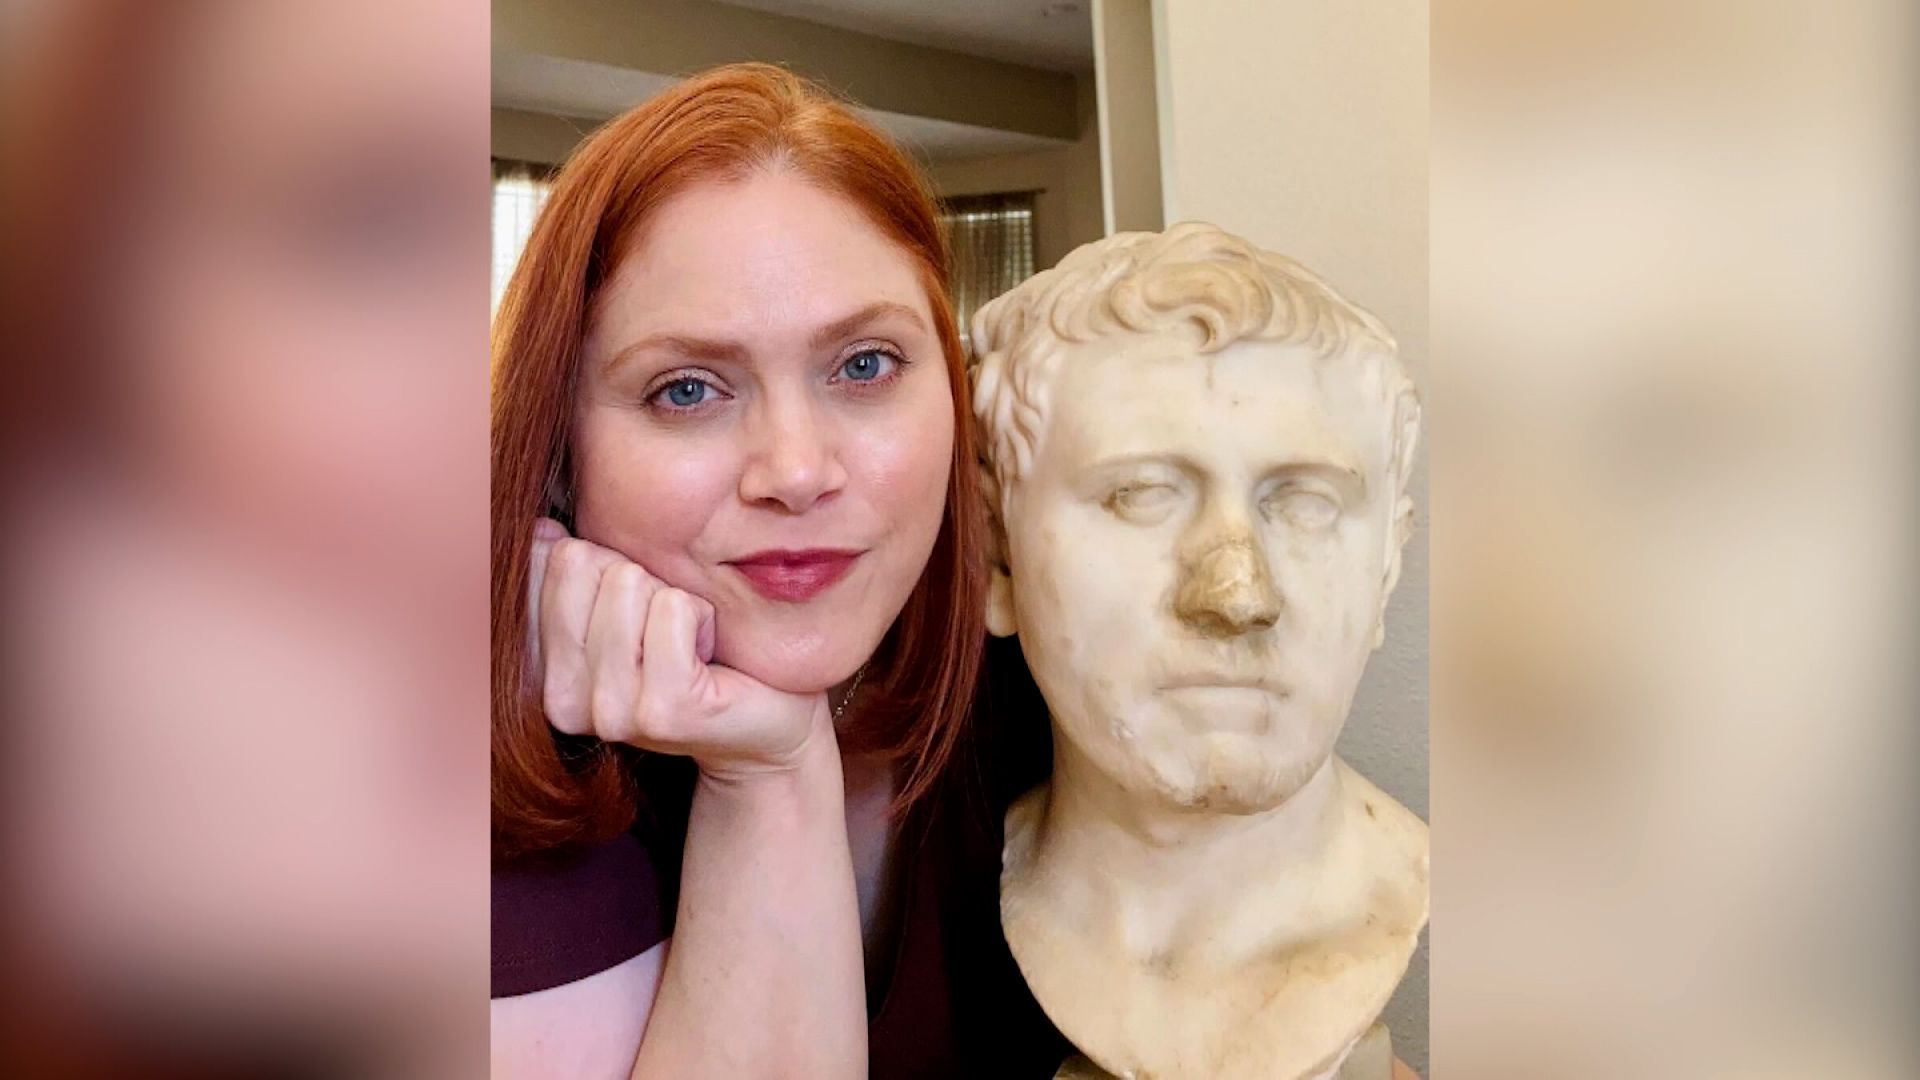 A $34.99 Goodwill purchase turned out to be an ancient Roman bust that's  nearly 2,000 years old | CNN